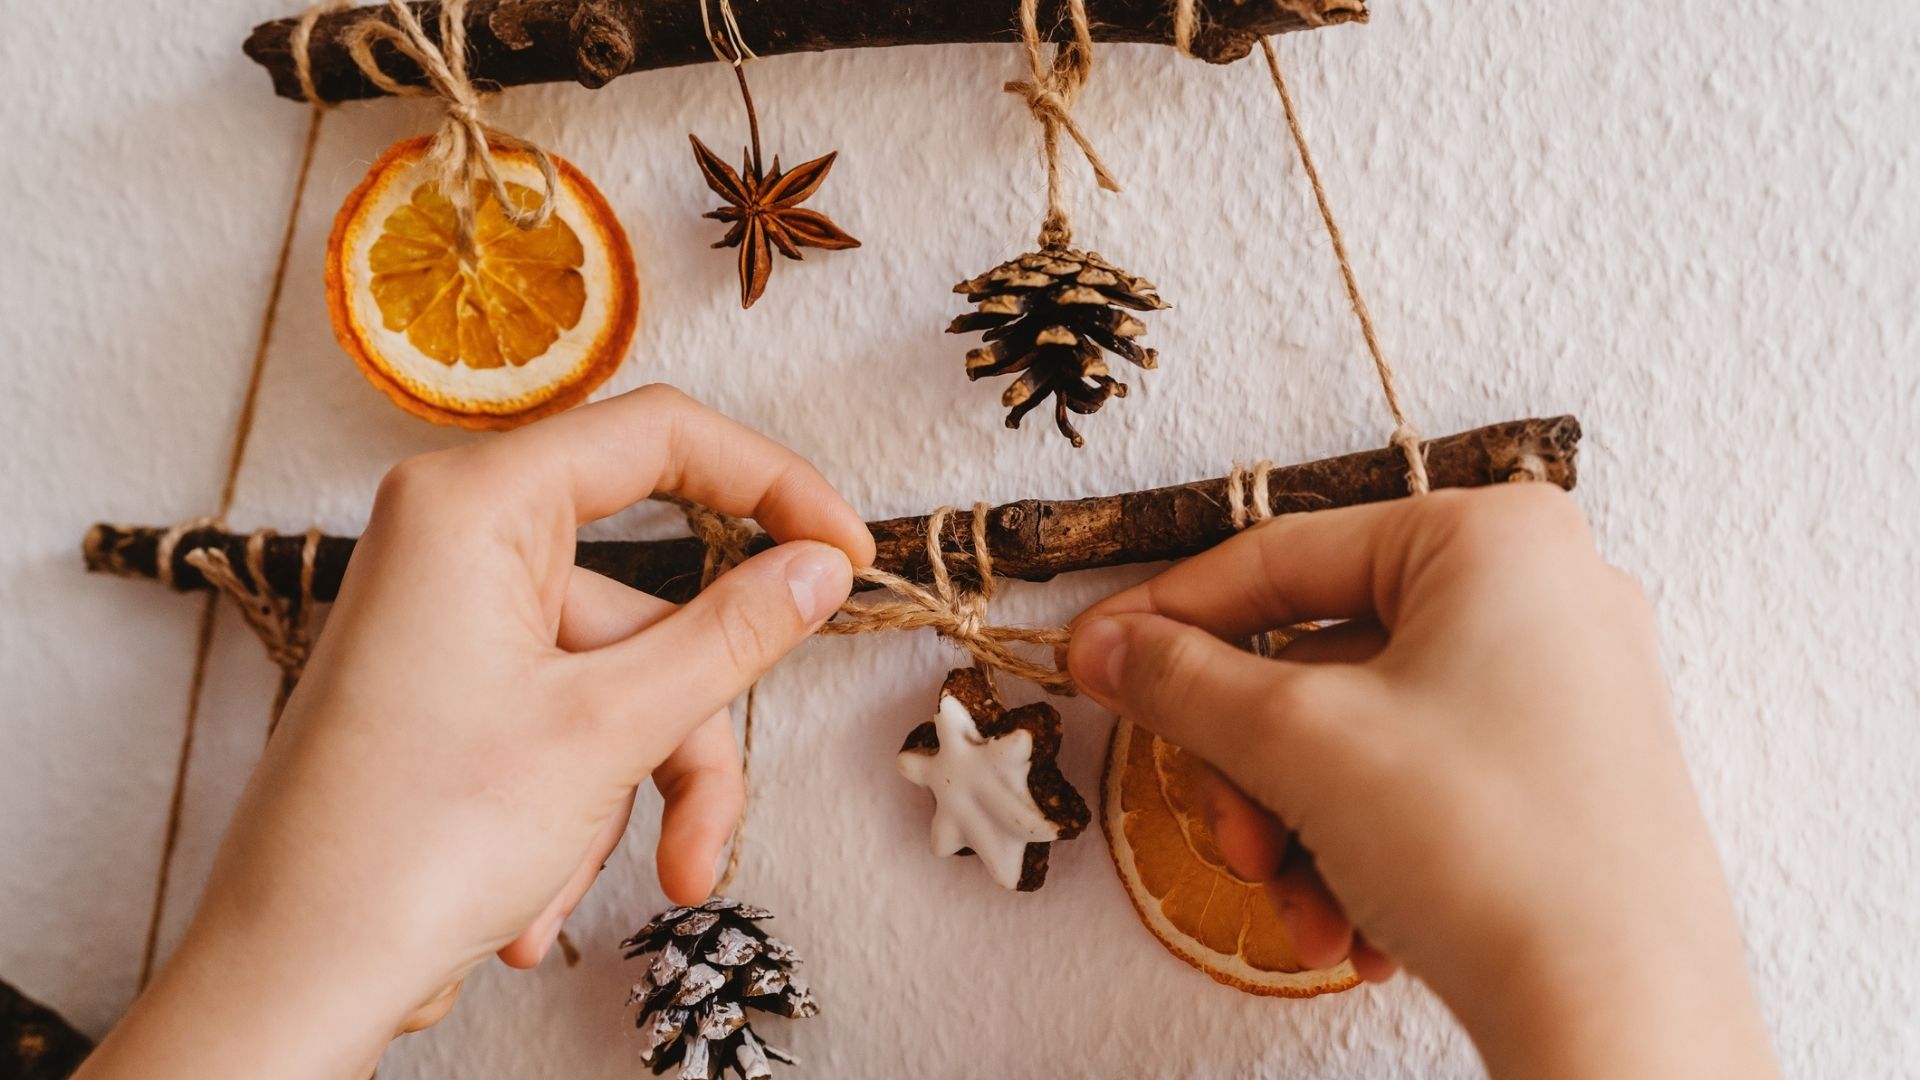 Two sticks in the shape of a Christmas tree hang on a wall, attached with twine are dried orange slices and pinecones. A pair of hands tie a bow on a piece of twine attaching a small cookie to one of the sticks.